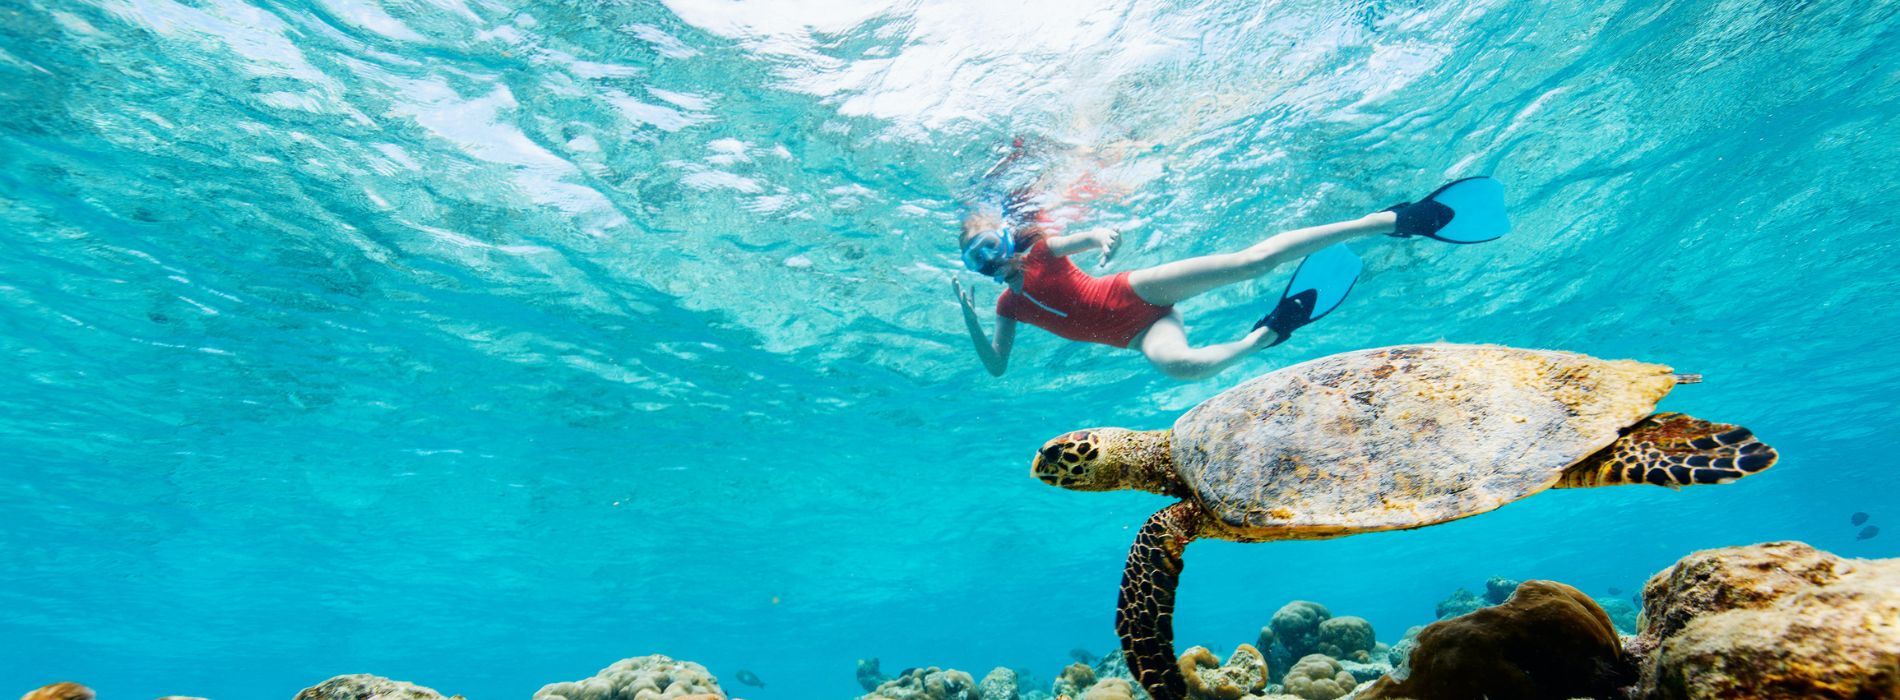 Snorkeling with Sea Turtles in Oahu - A Magical Encounter